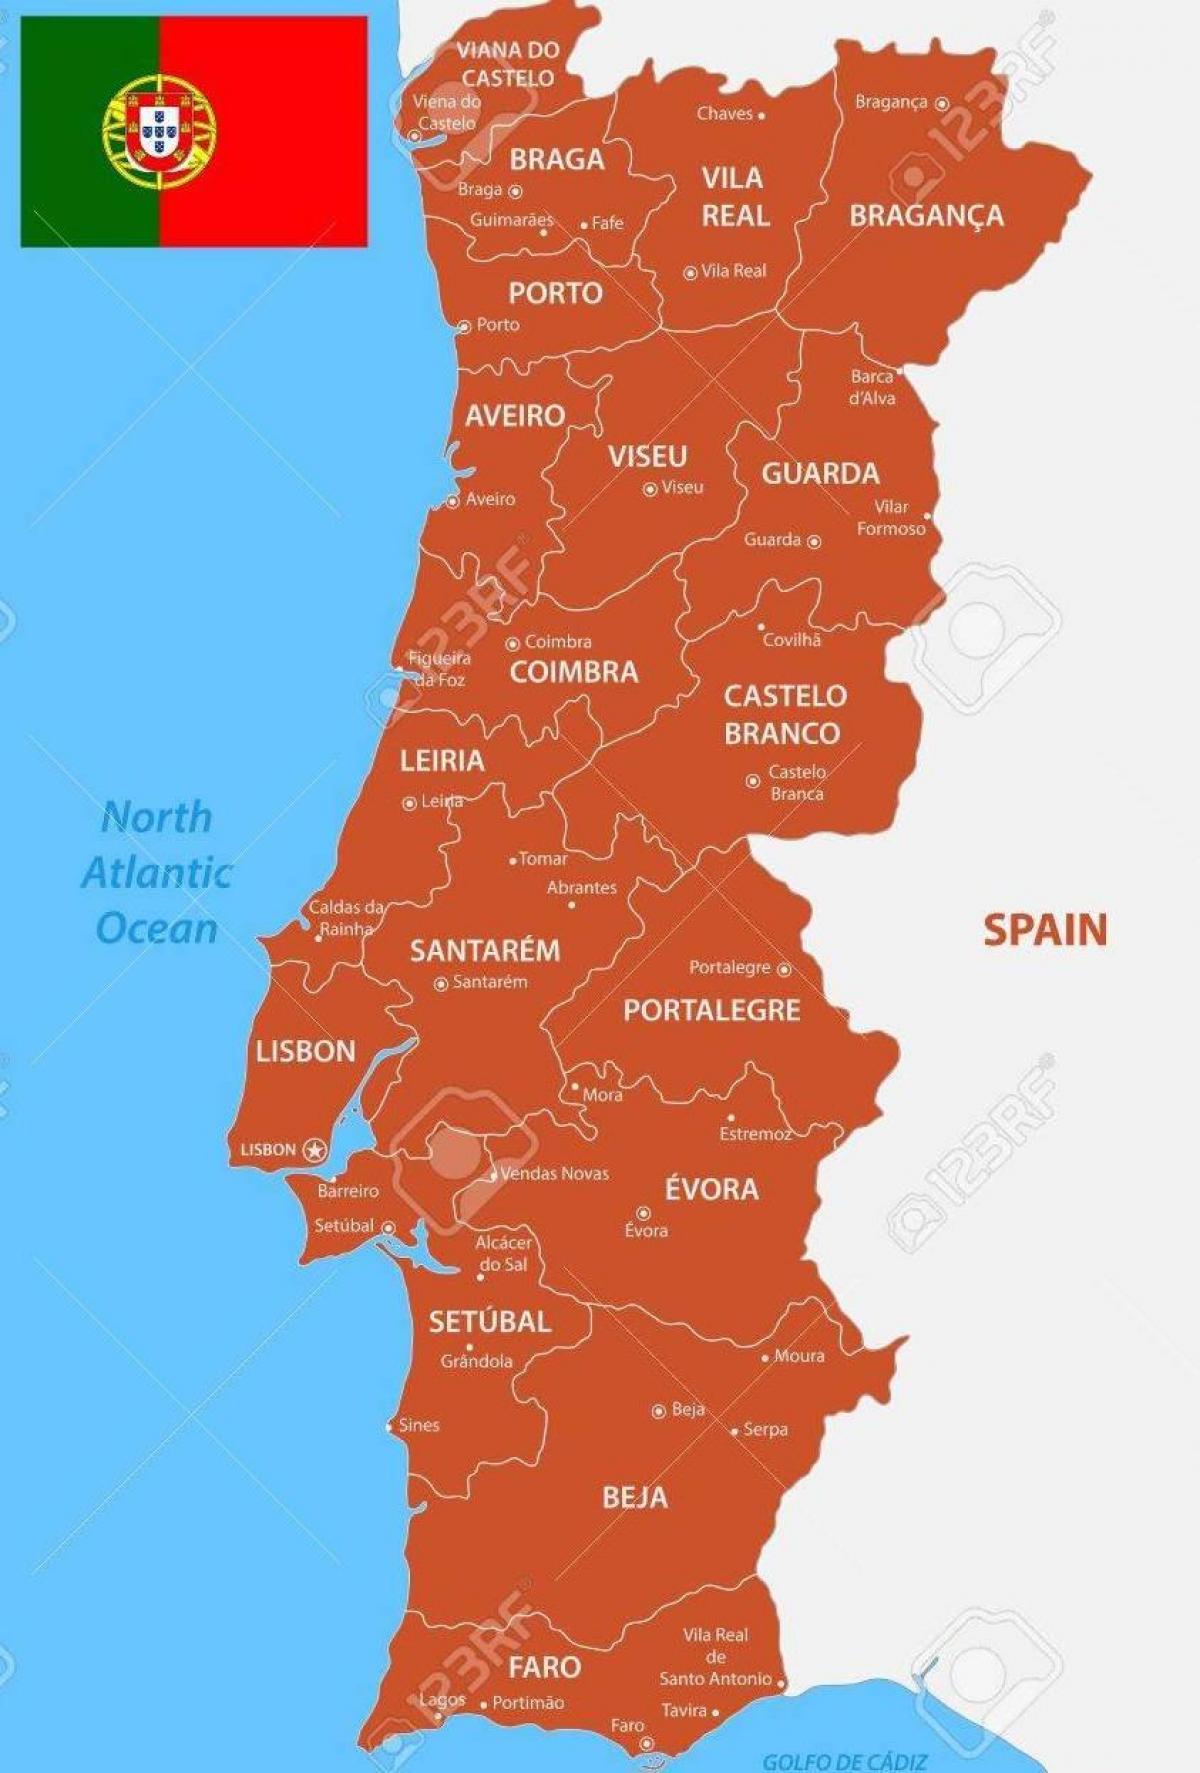 Portugal state map